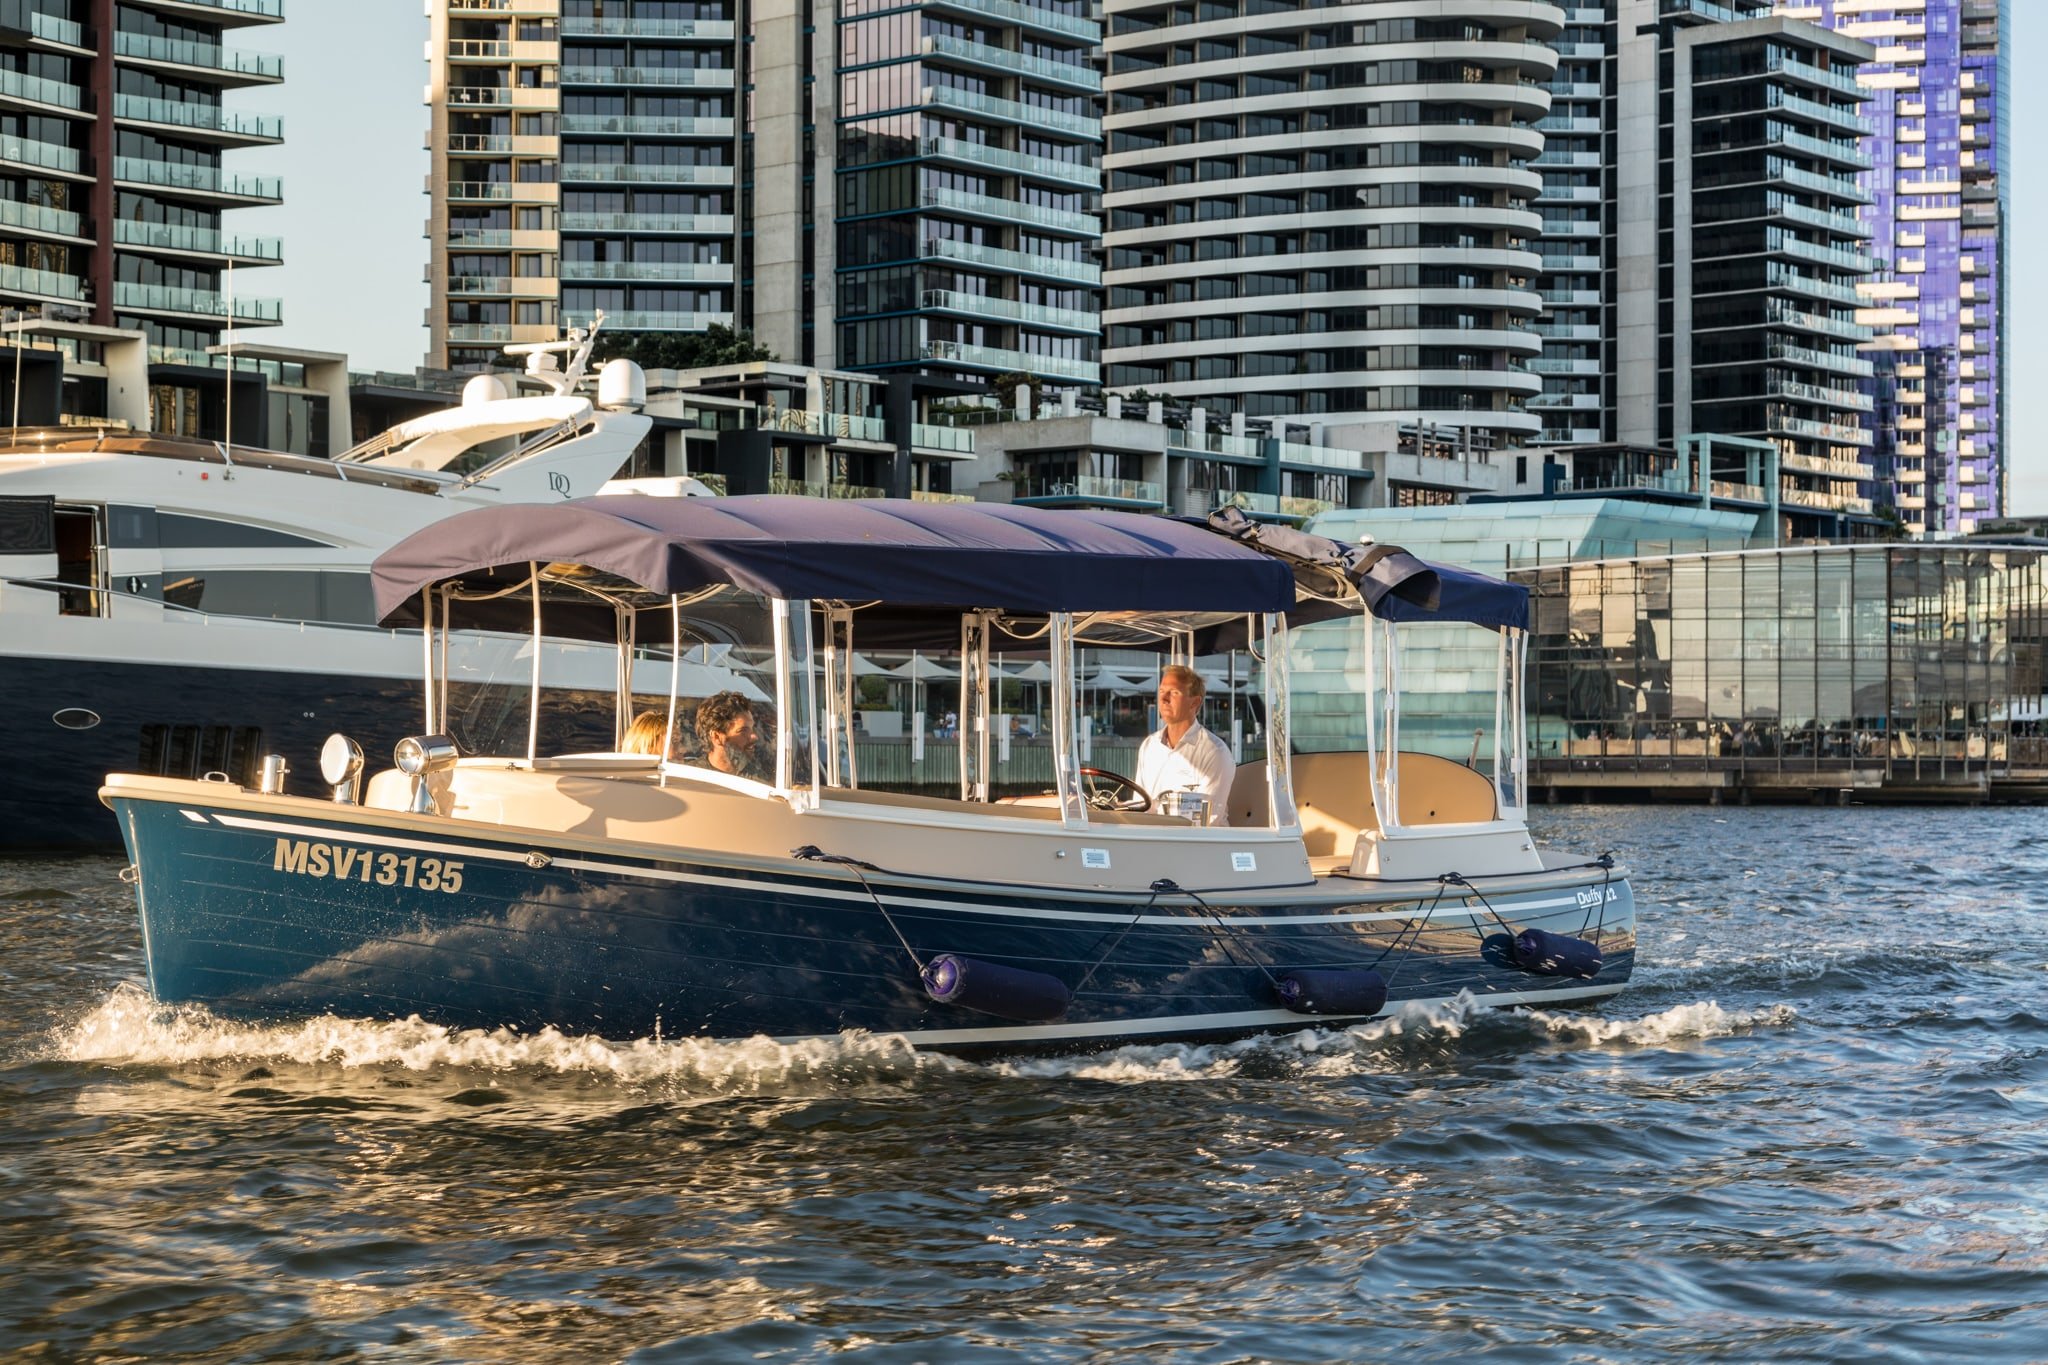 self-drive sunset boat cruise Melbourne